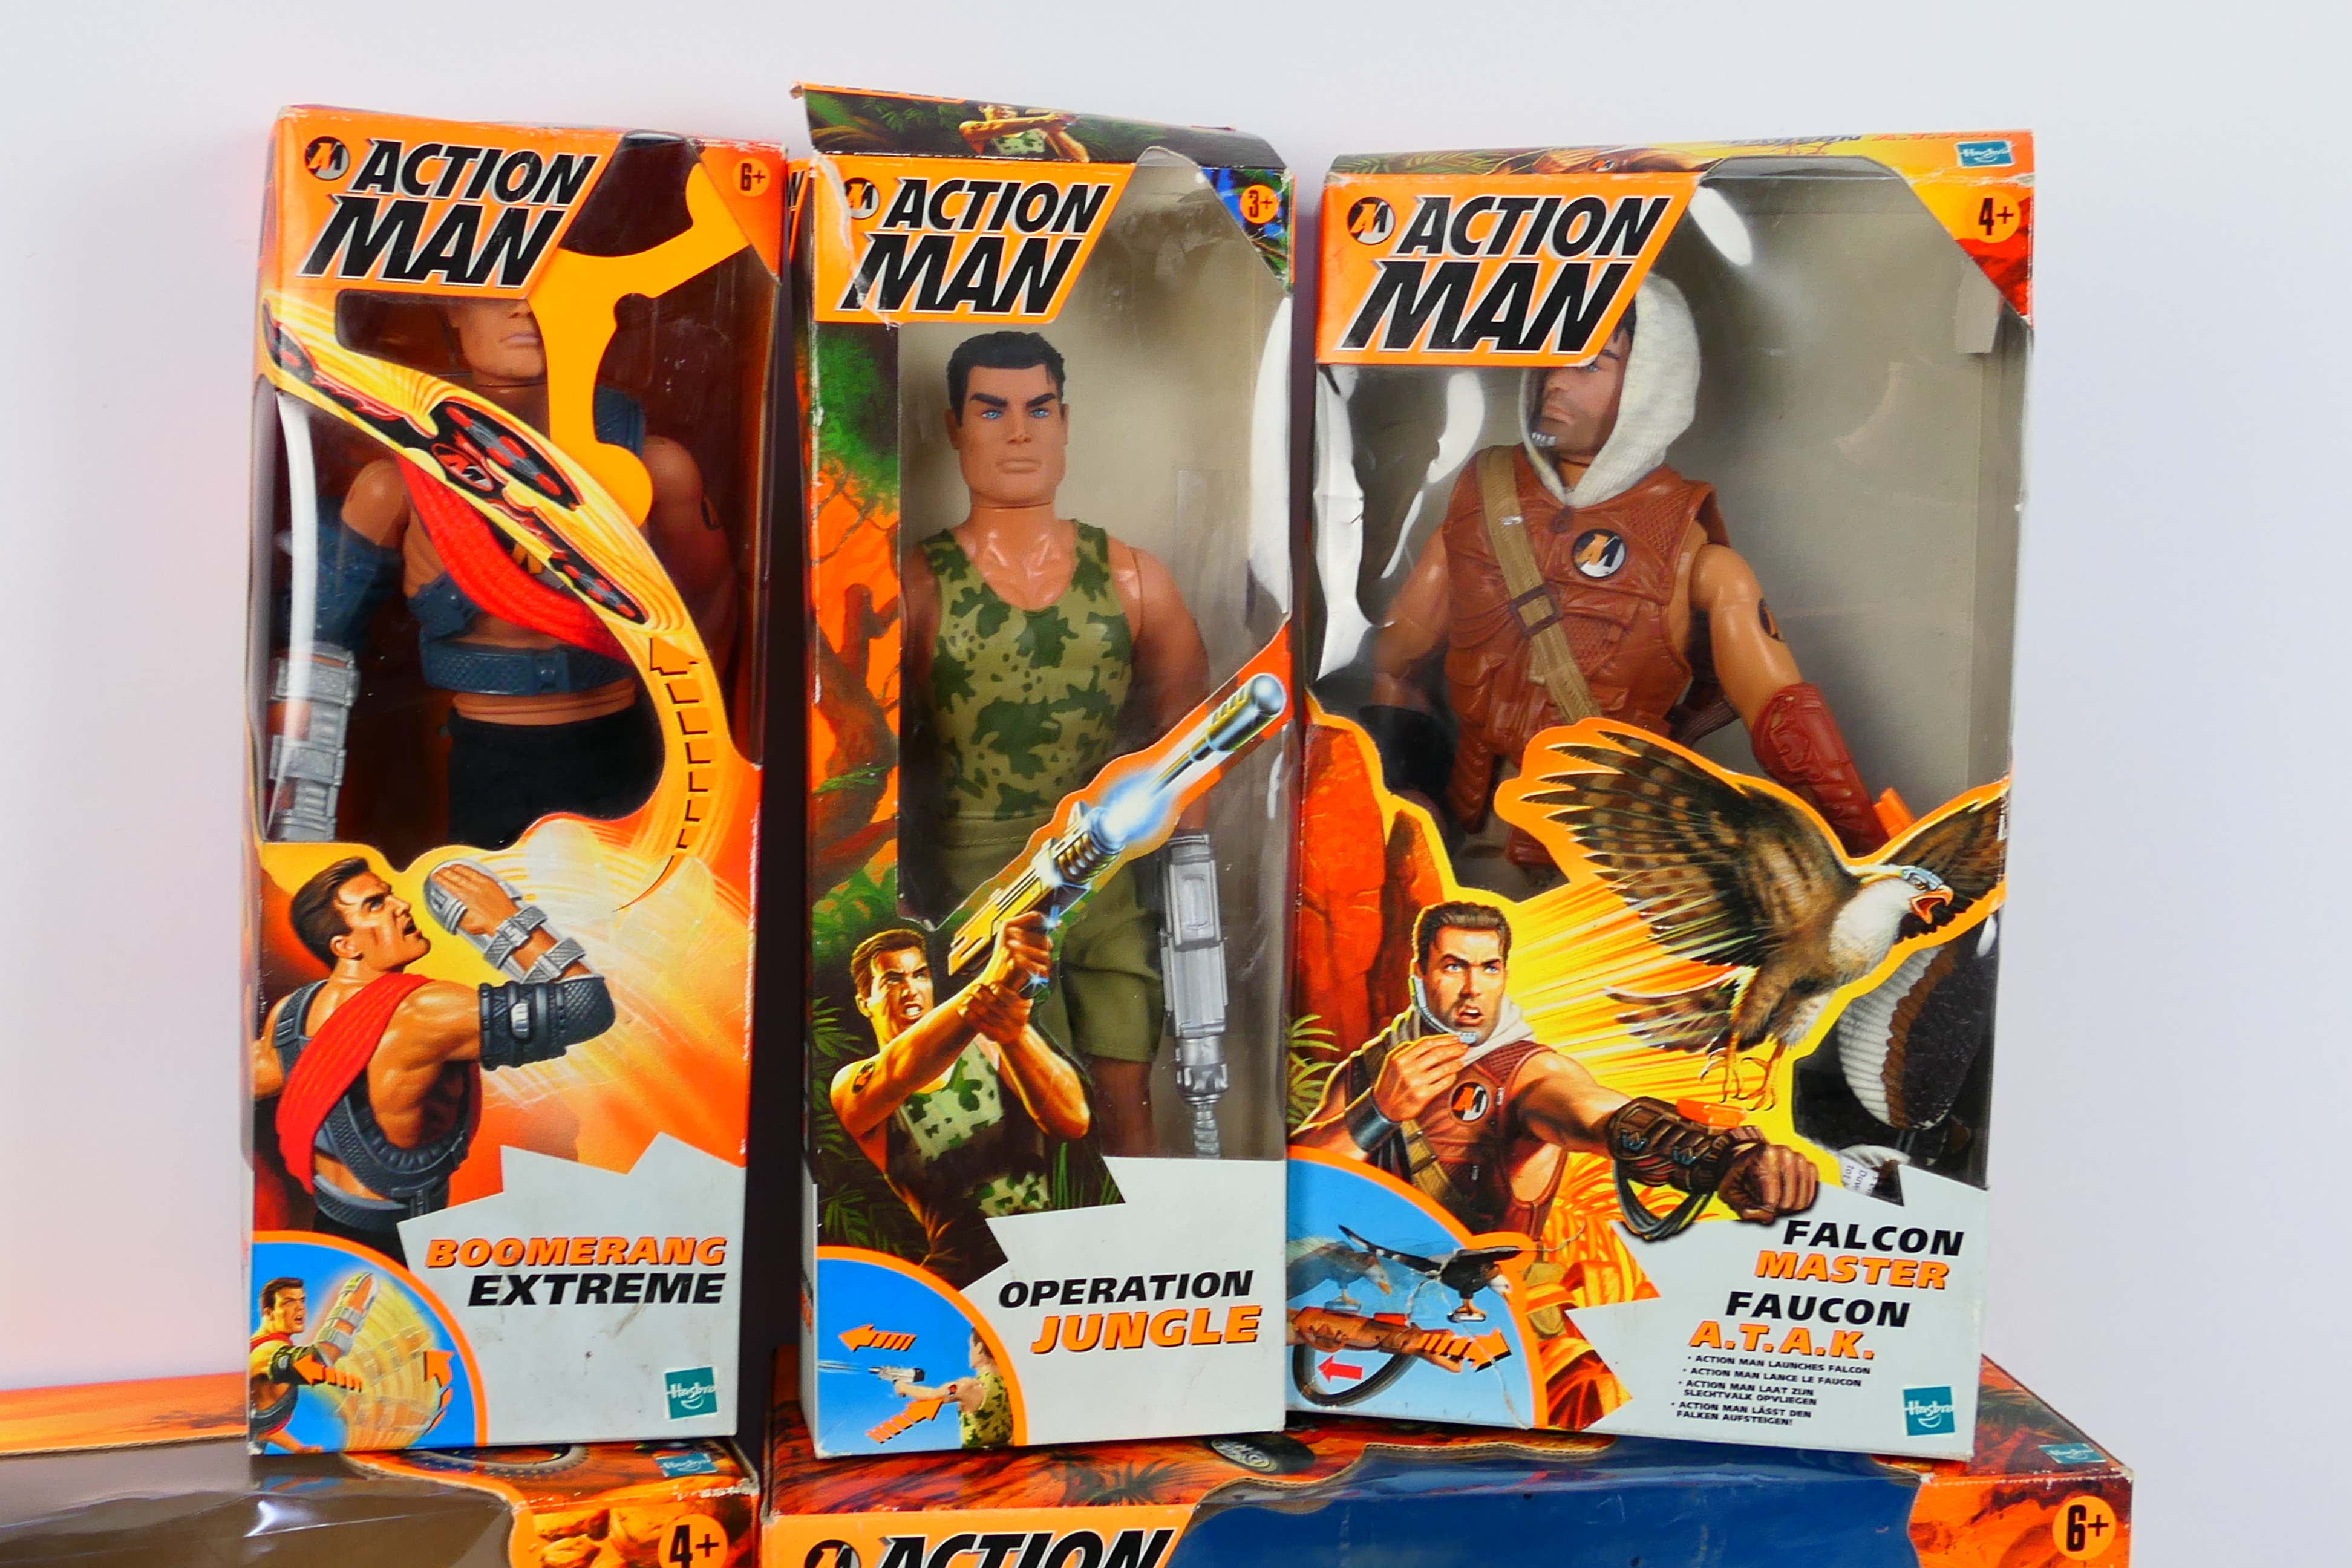 Hasbro - Action Man - 5 x boxed Action Man figures, Operation Jungle # 89508, - Image 2 of 3